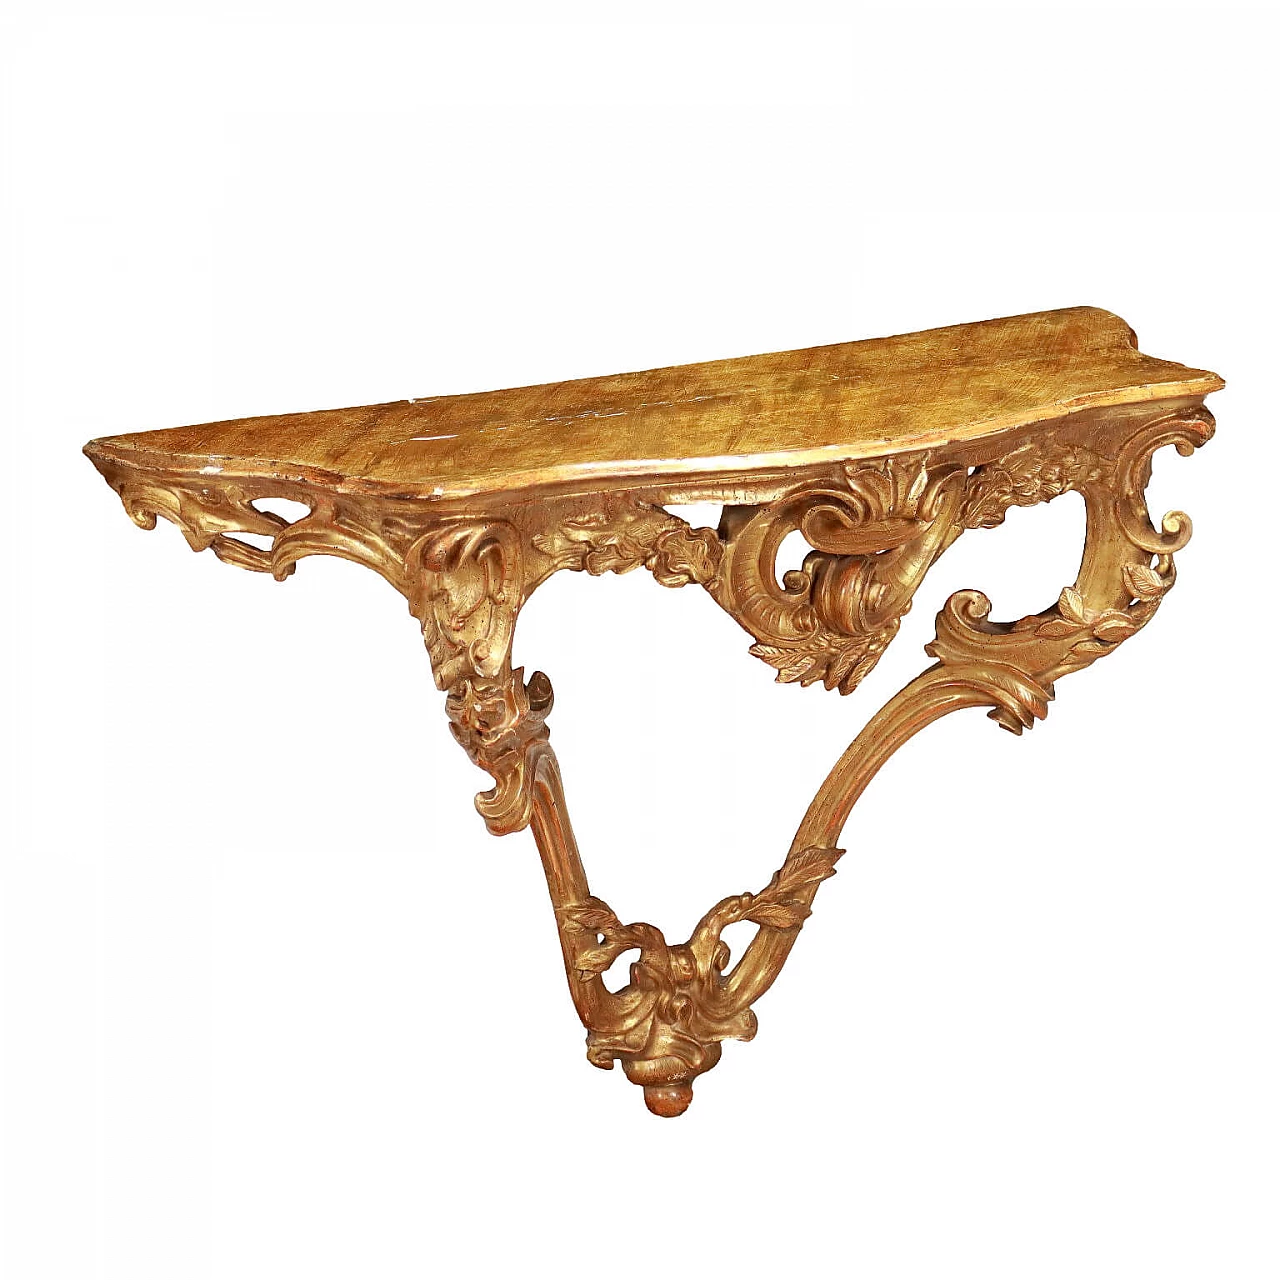 Drop-shaped console table in carved and gilded wood with curved legs, 19th century 1